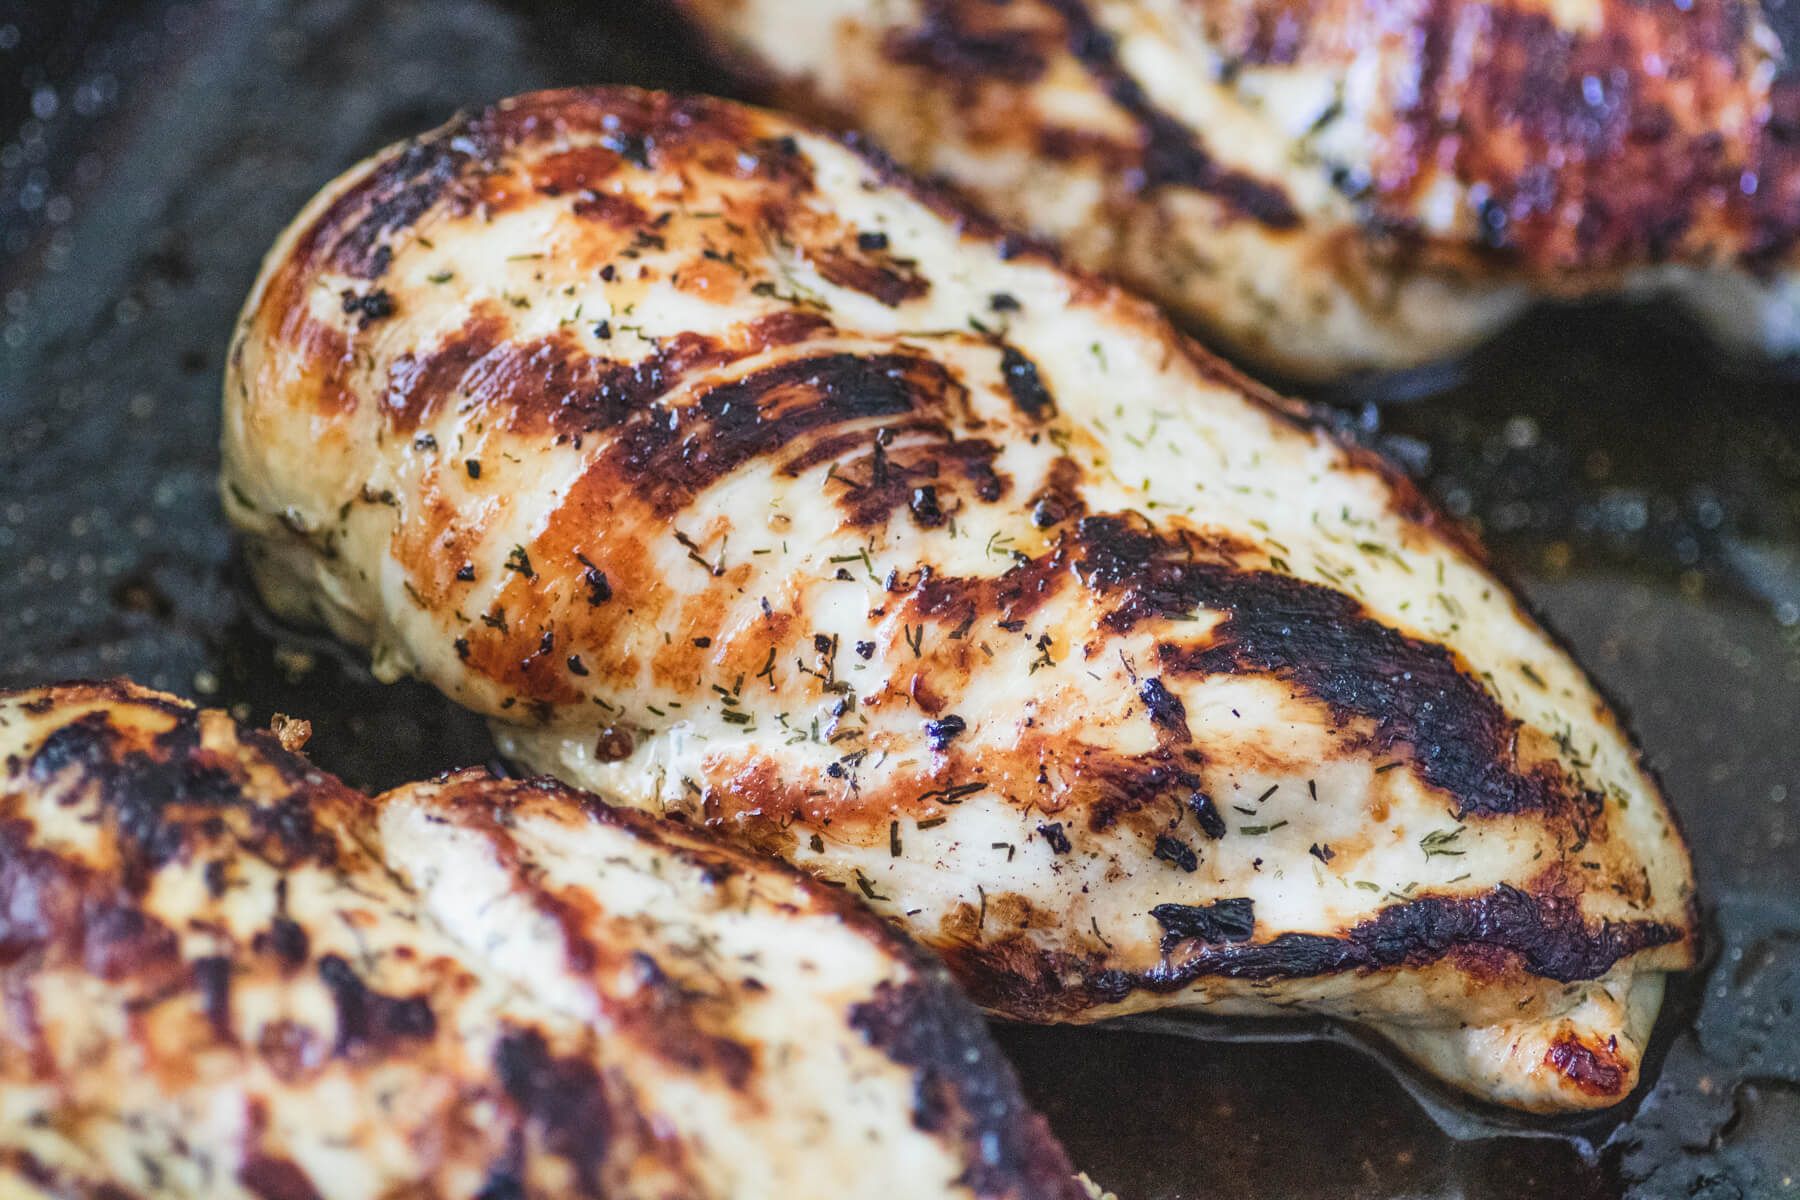 A perfectly cooked buttermilk and dill brined chicken breast.